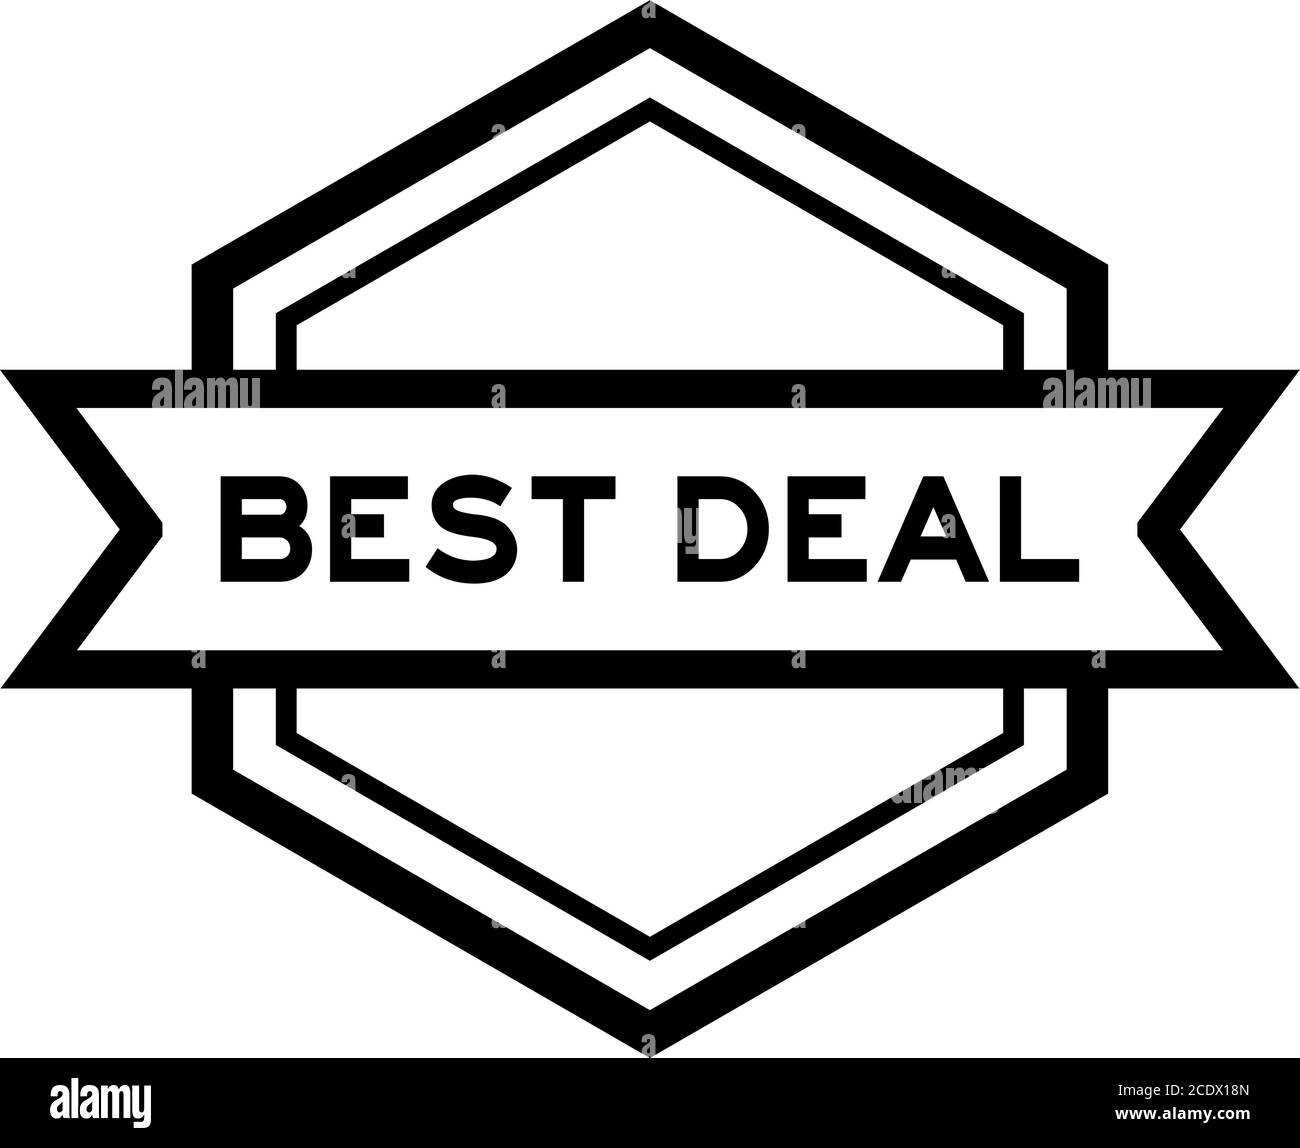 Lowest price label vector illustration Black and White Stock Photos & Images  - Alamy